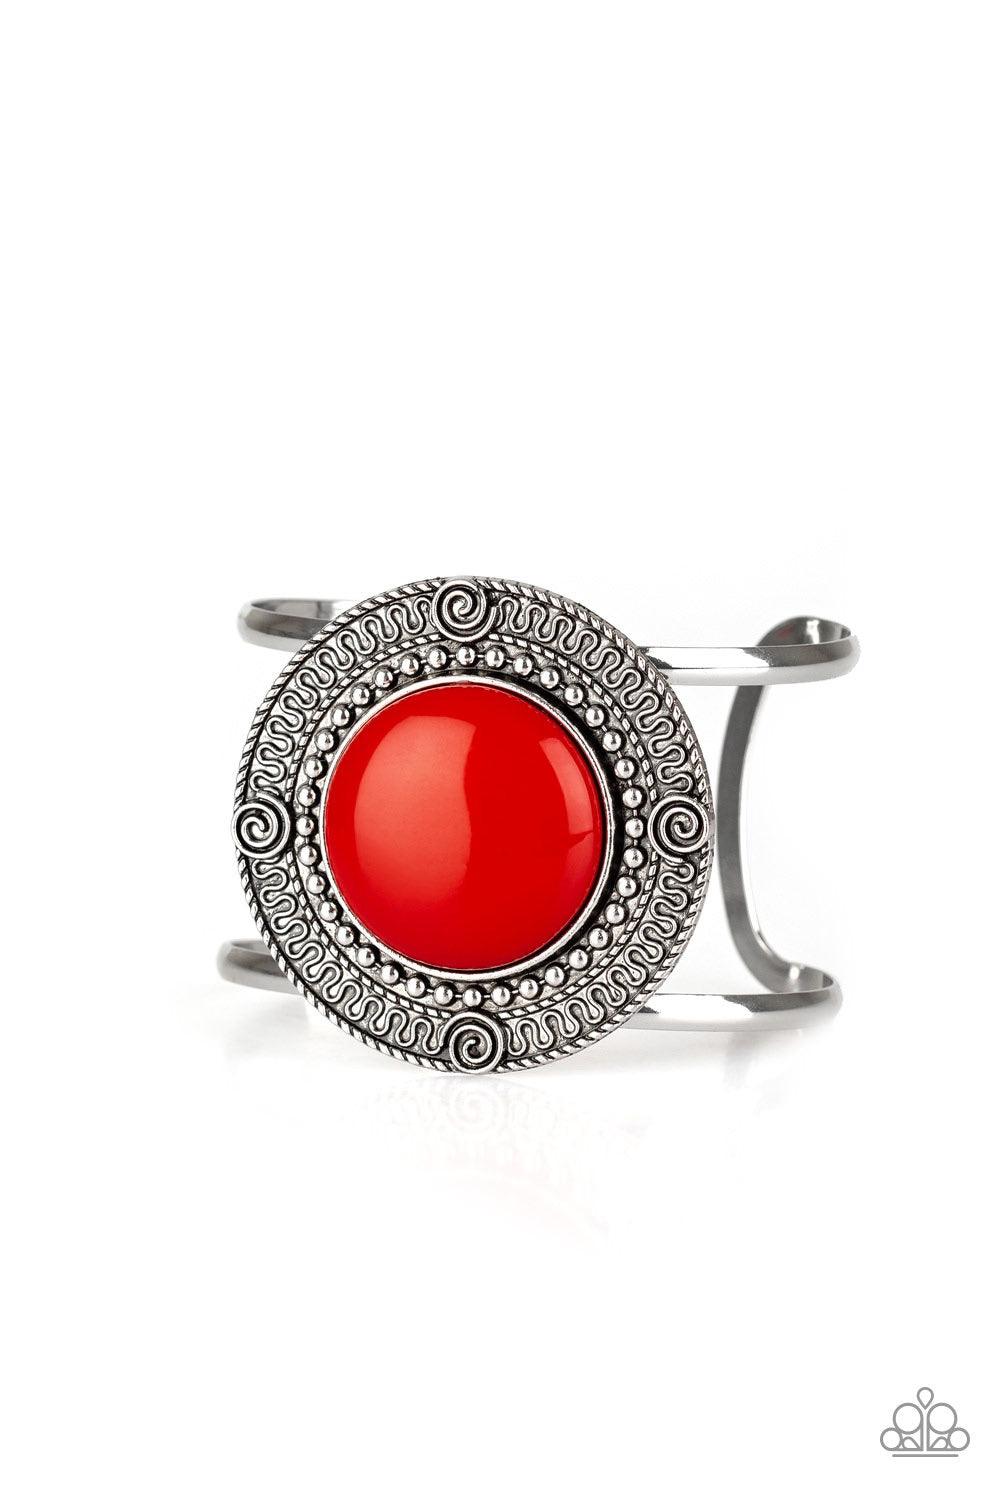 Paparazzi Accessories Tribal Pop - Red An oversized red bead is pressed into the center of a round silver frame radiating with swirly filigree detail. The bold frame sits atop an airy silver cuff for a vibrant pop of color. Jewelry